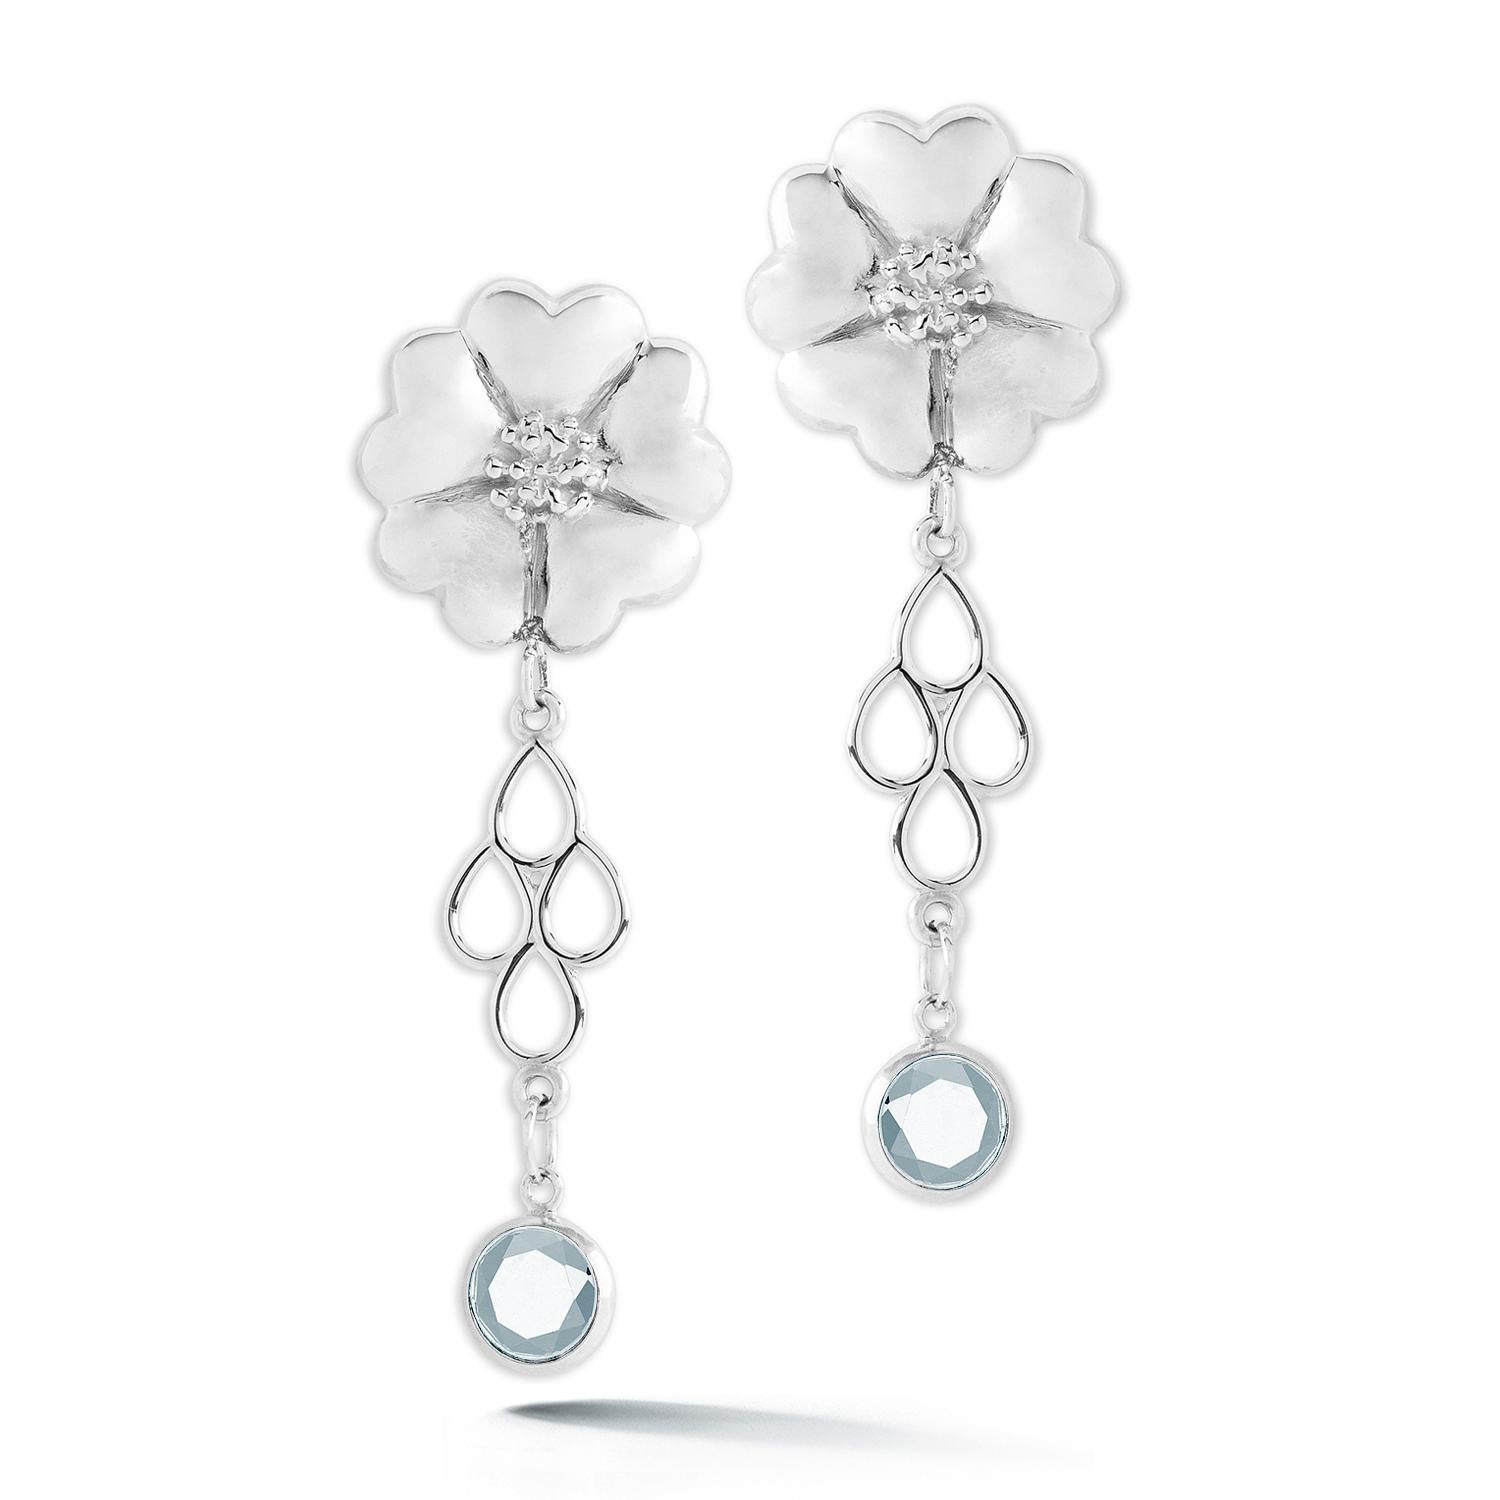 Designed in NYC

.925 Sterling Silver 2 x 6 mm White Topaz Blossom Stone Chandelier Earrings. No matter the season, allow natural beauty to surround you wherever you go. Blossom stone chandelier earrings: 

	Sterling silver 
	High-polish finish